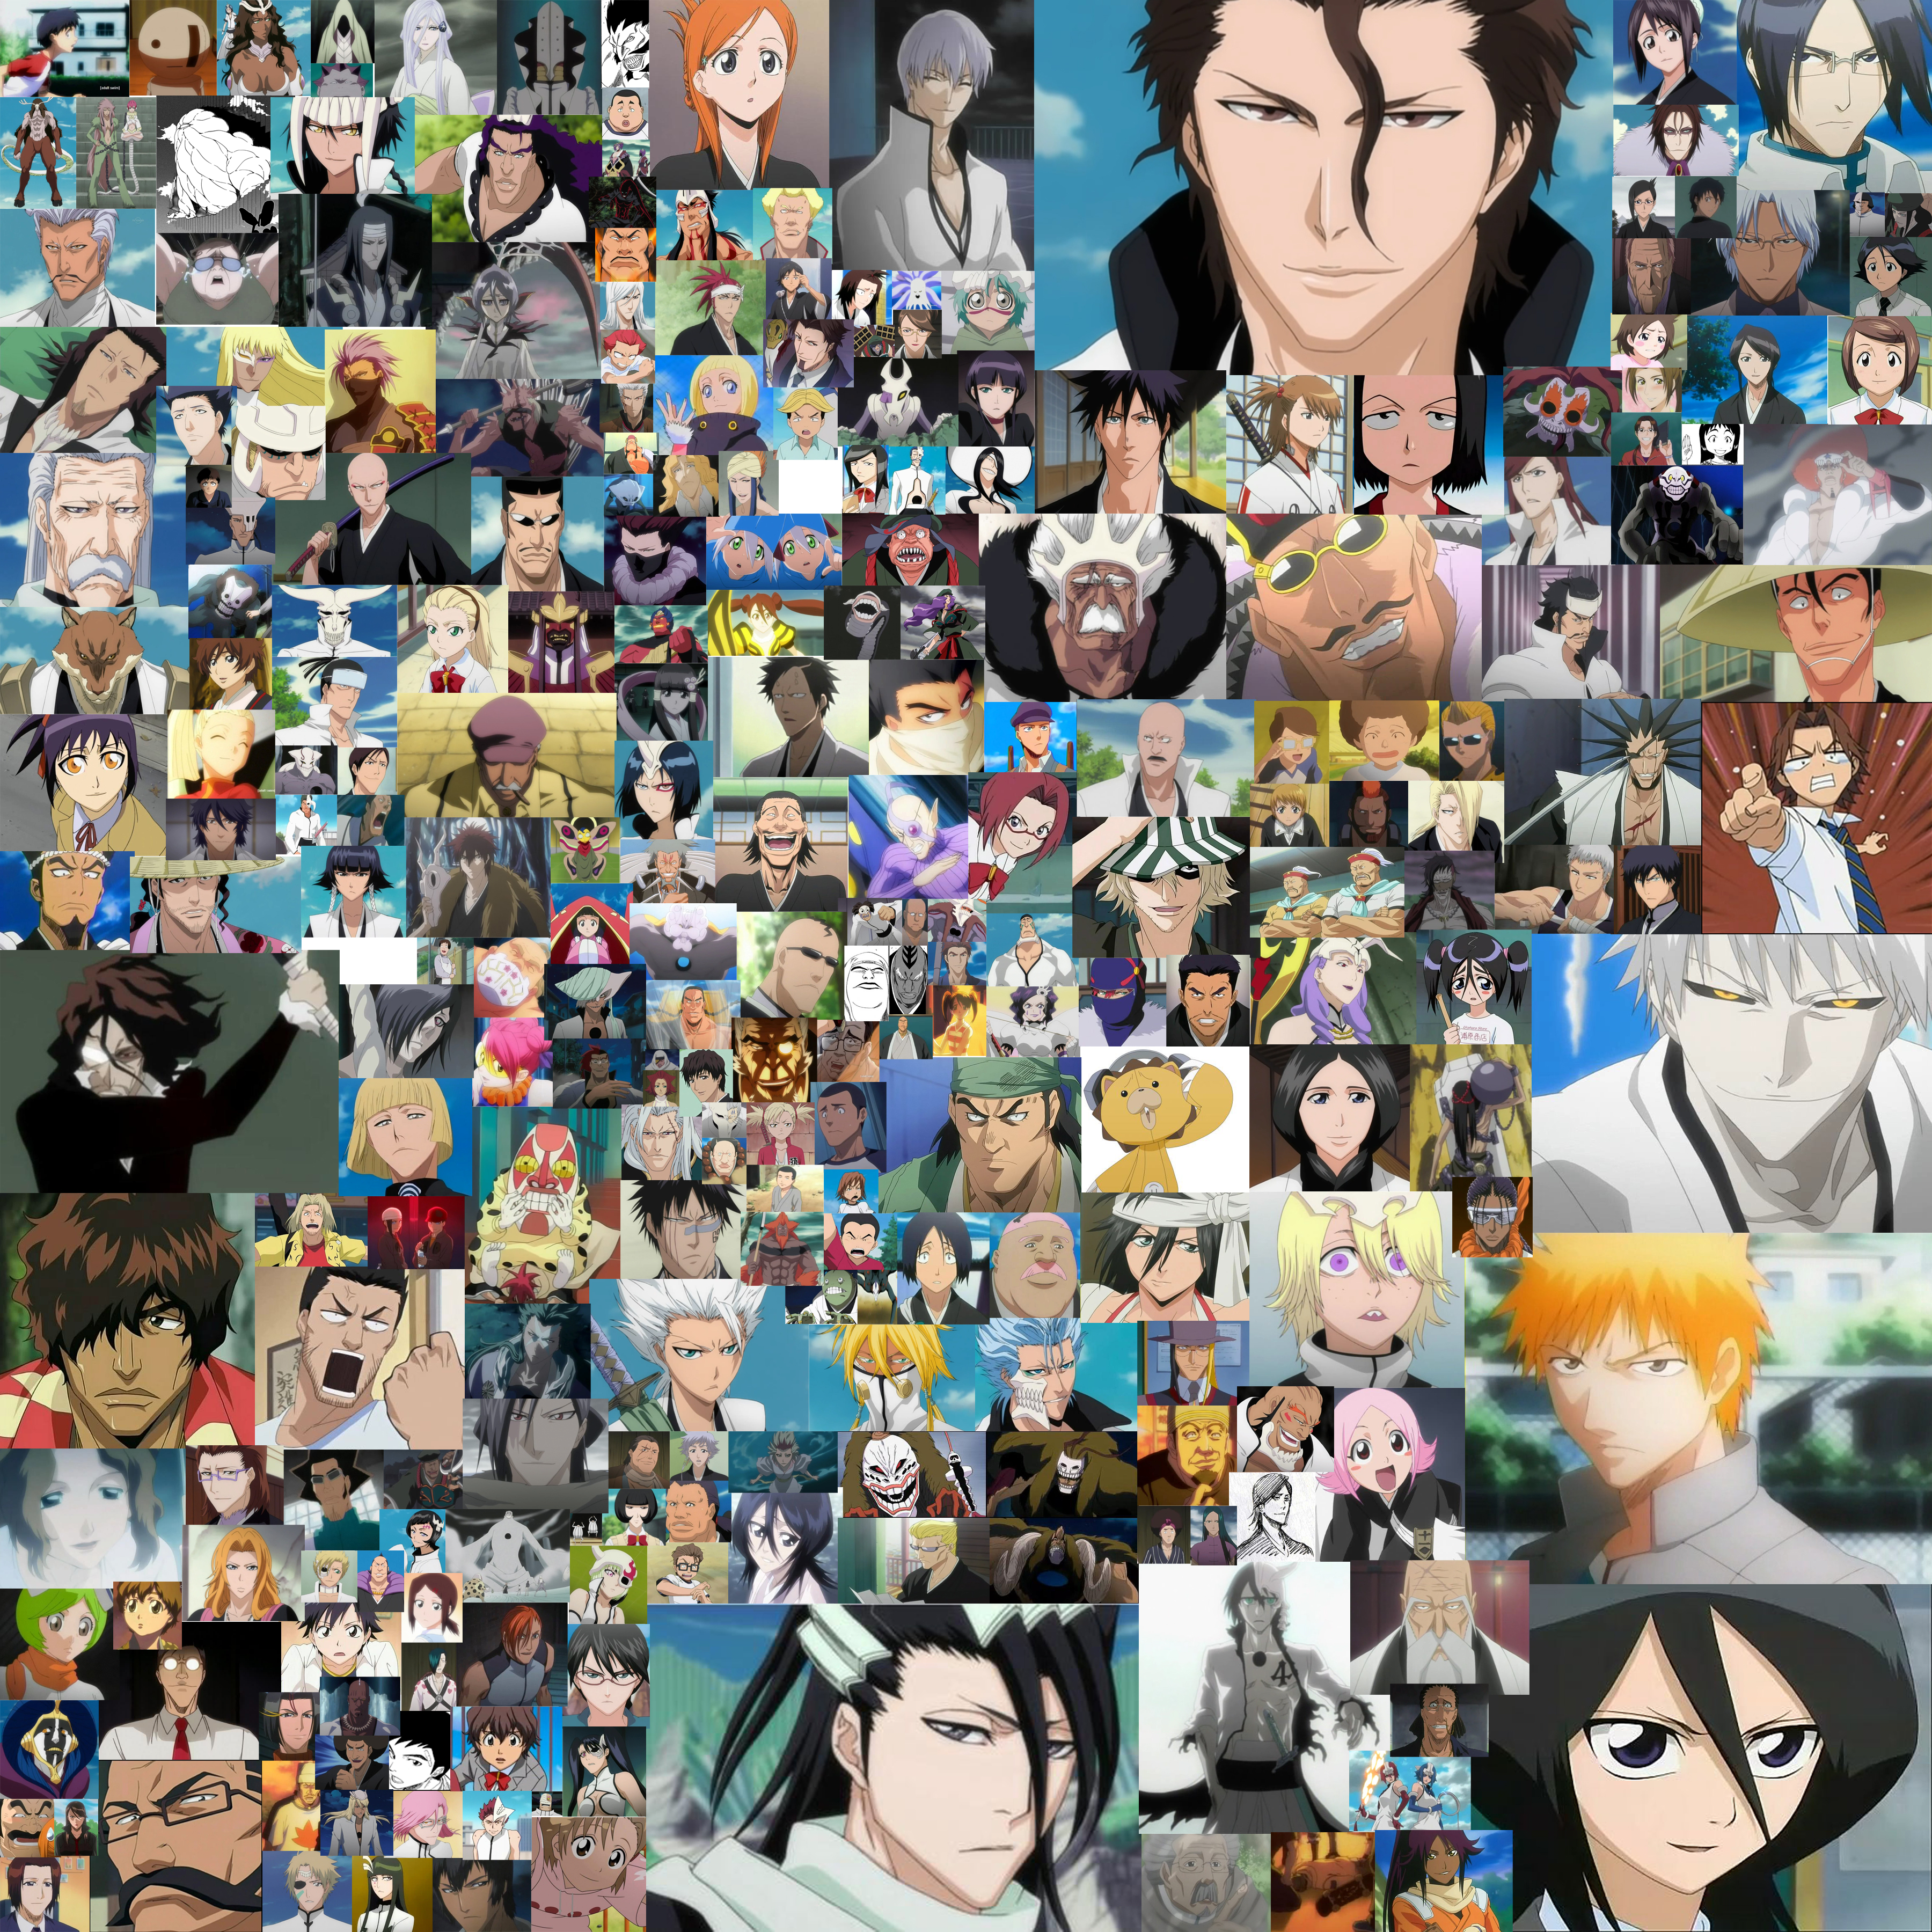 Bleach Character Collage by Mani-B on DeviantArt